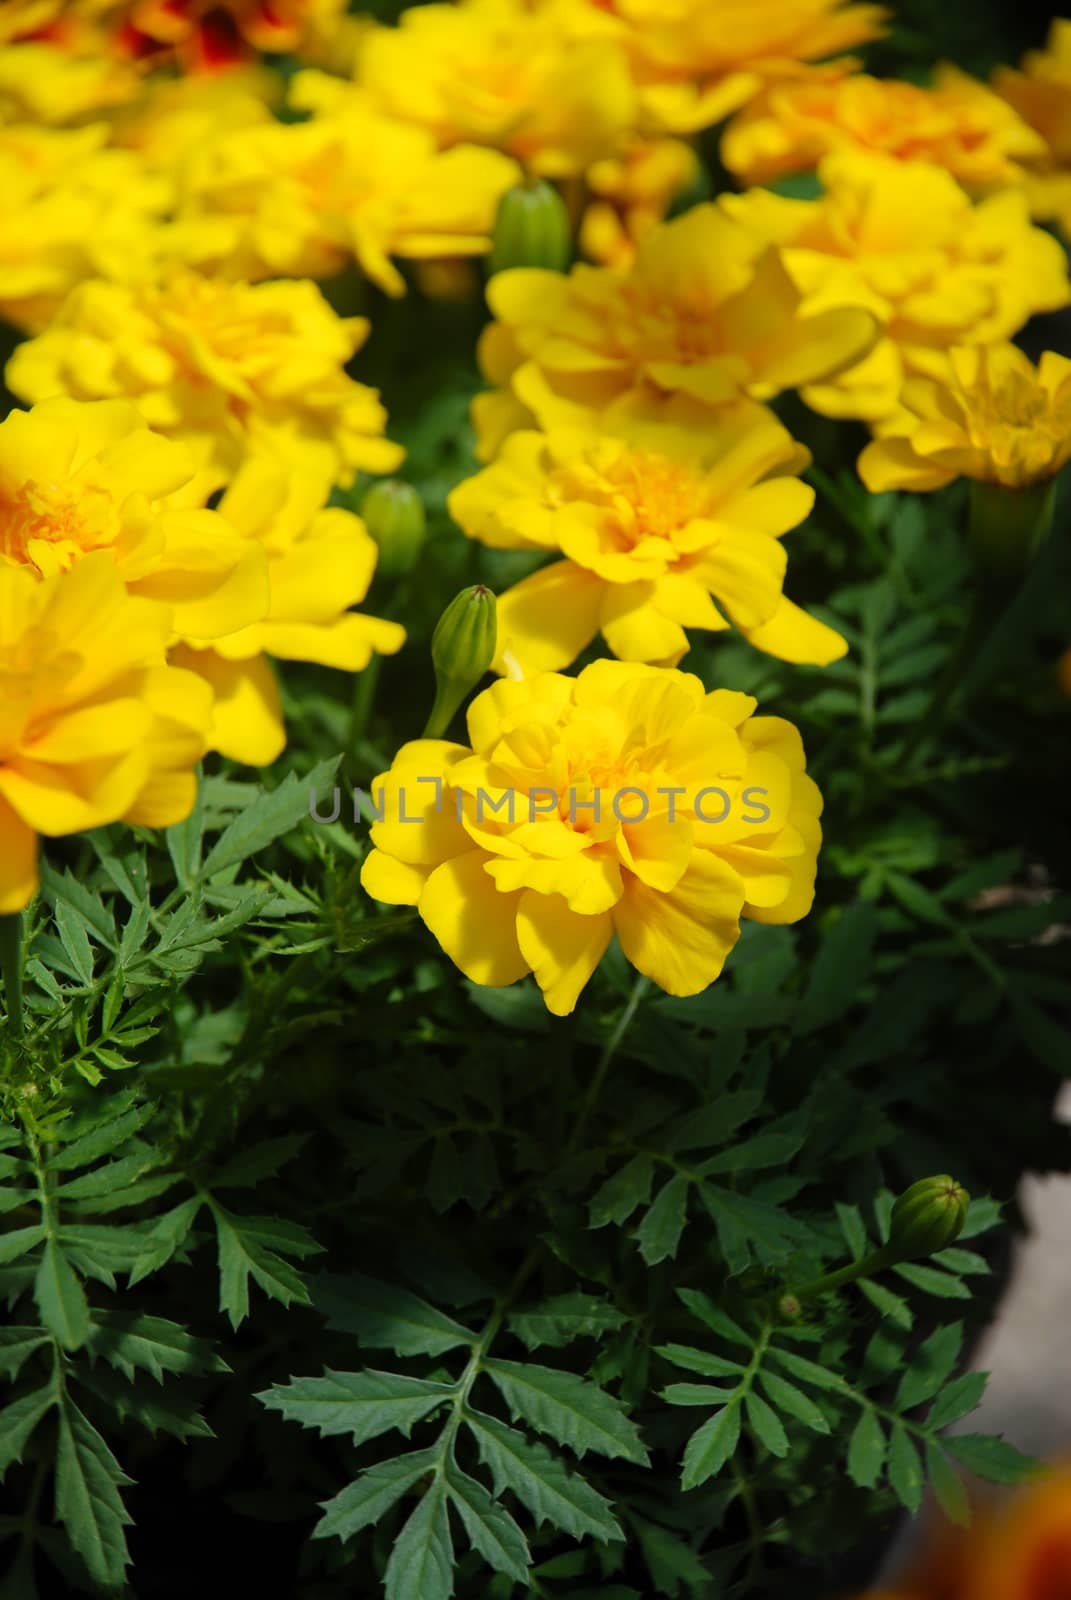 Tagetes patula french marigold in bloom, yellow flowers, green l by yuiyuize